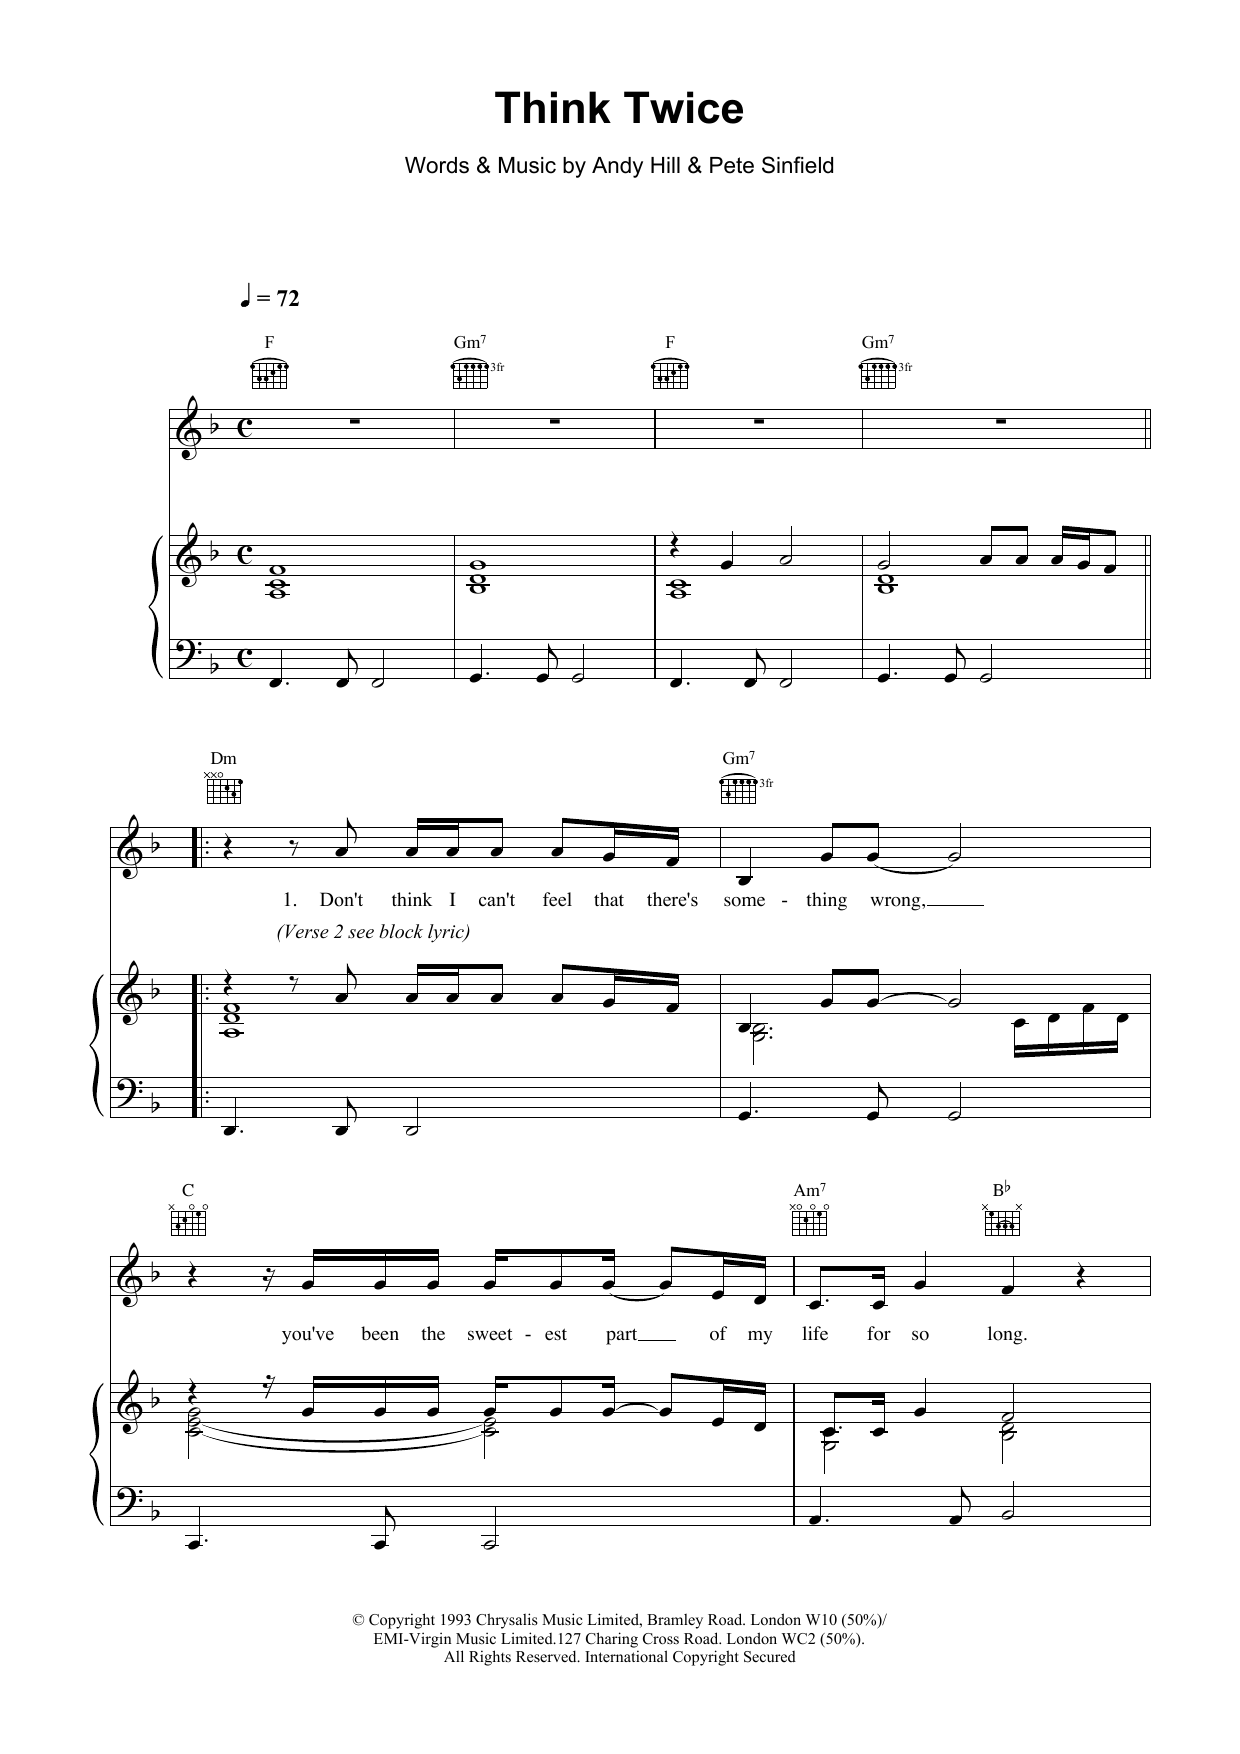 Celine Dion Think Twice Sheet Music Download Printable Pop Pdf Score How To Play On Piano Chords Lyrics Sku